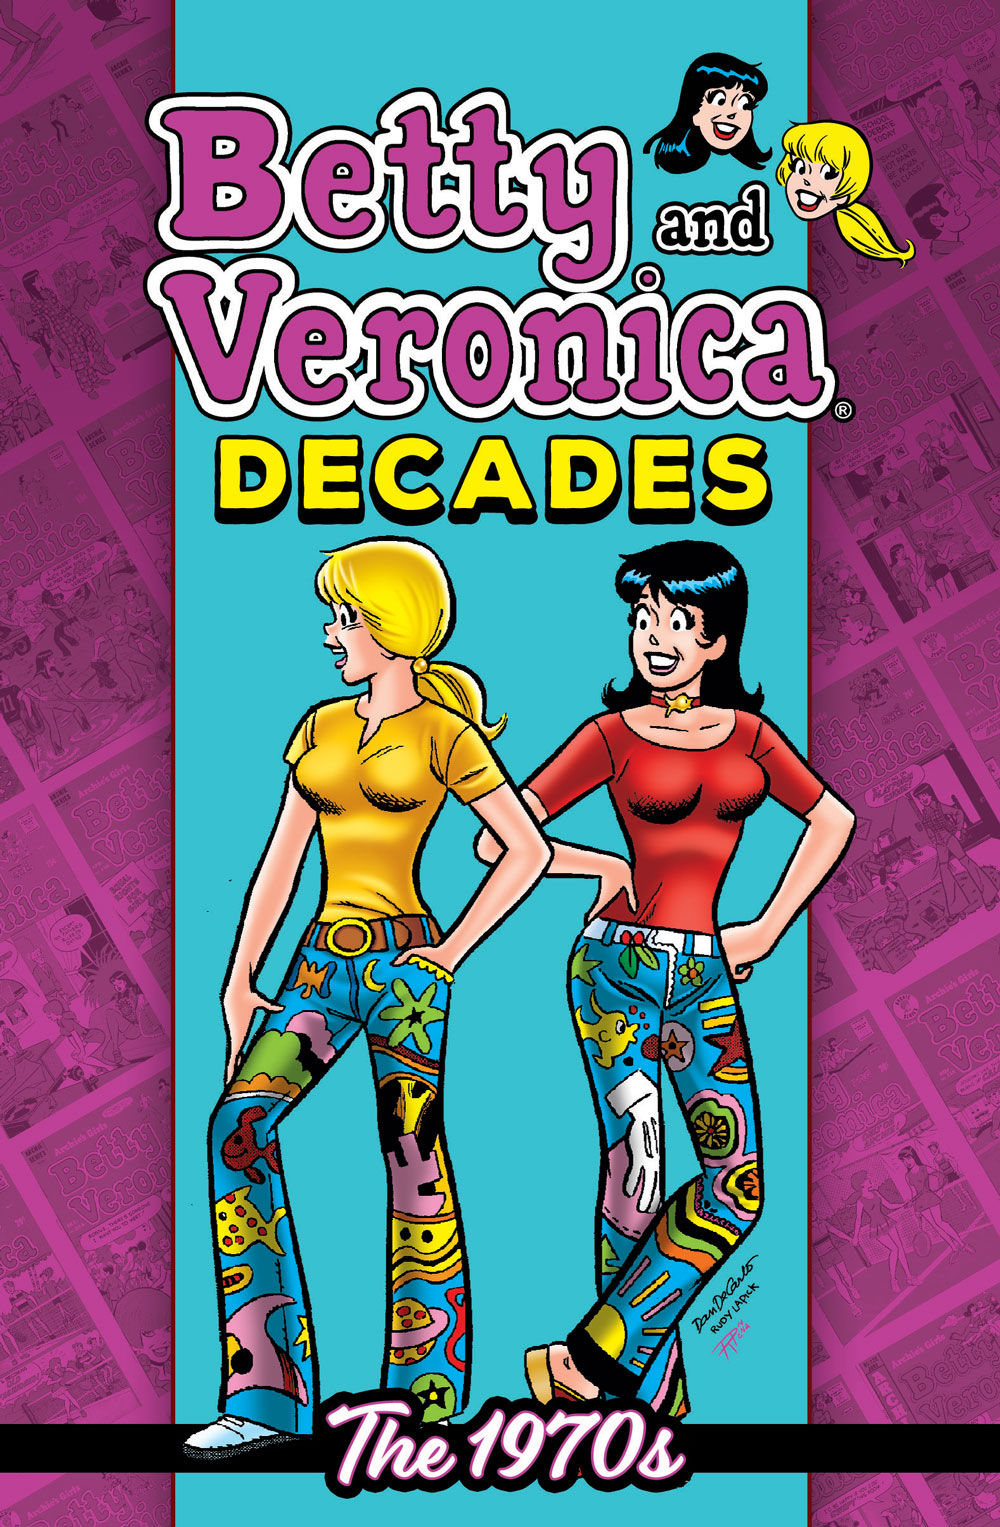 Cover of BETTY & VERONICA DECADES: THE 1970S. Betty and Veronica pose wearing 1970s fashion.